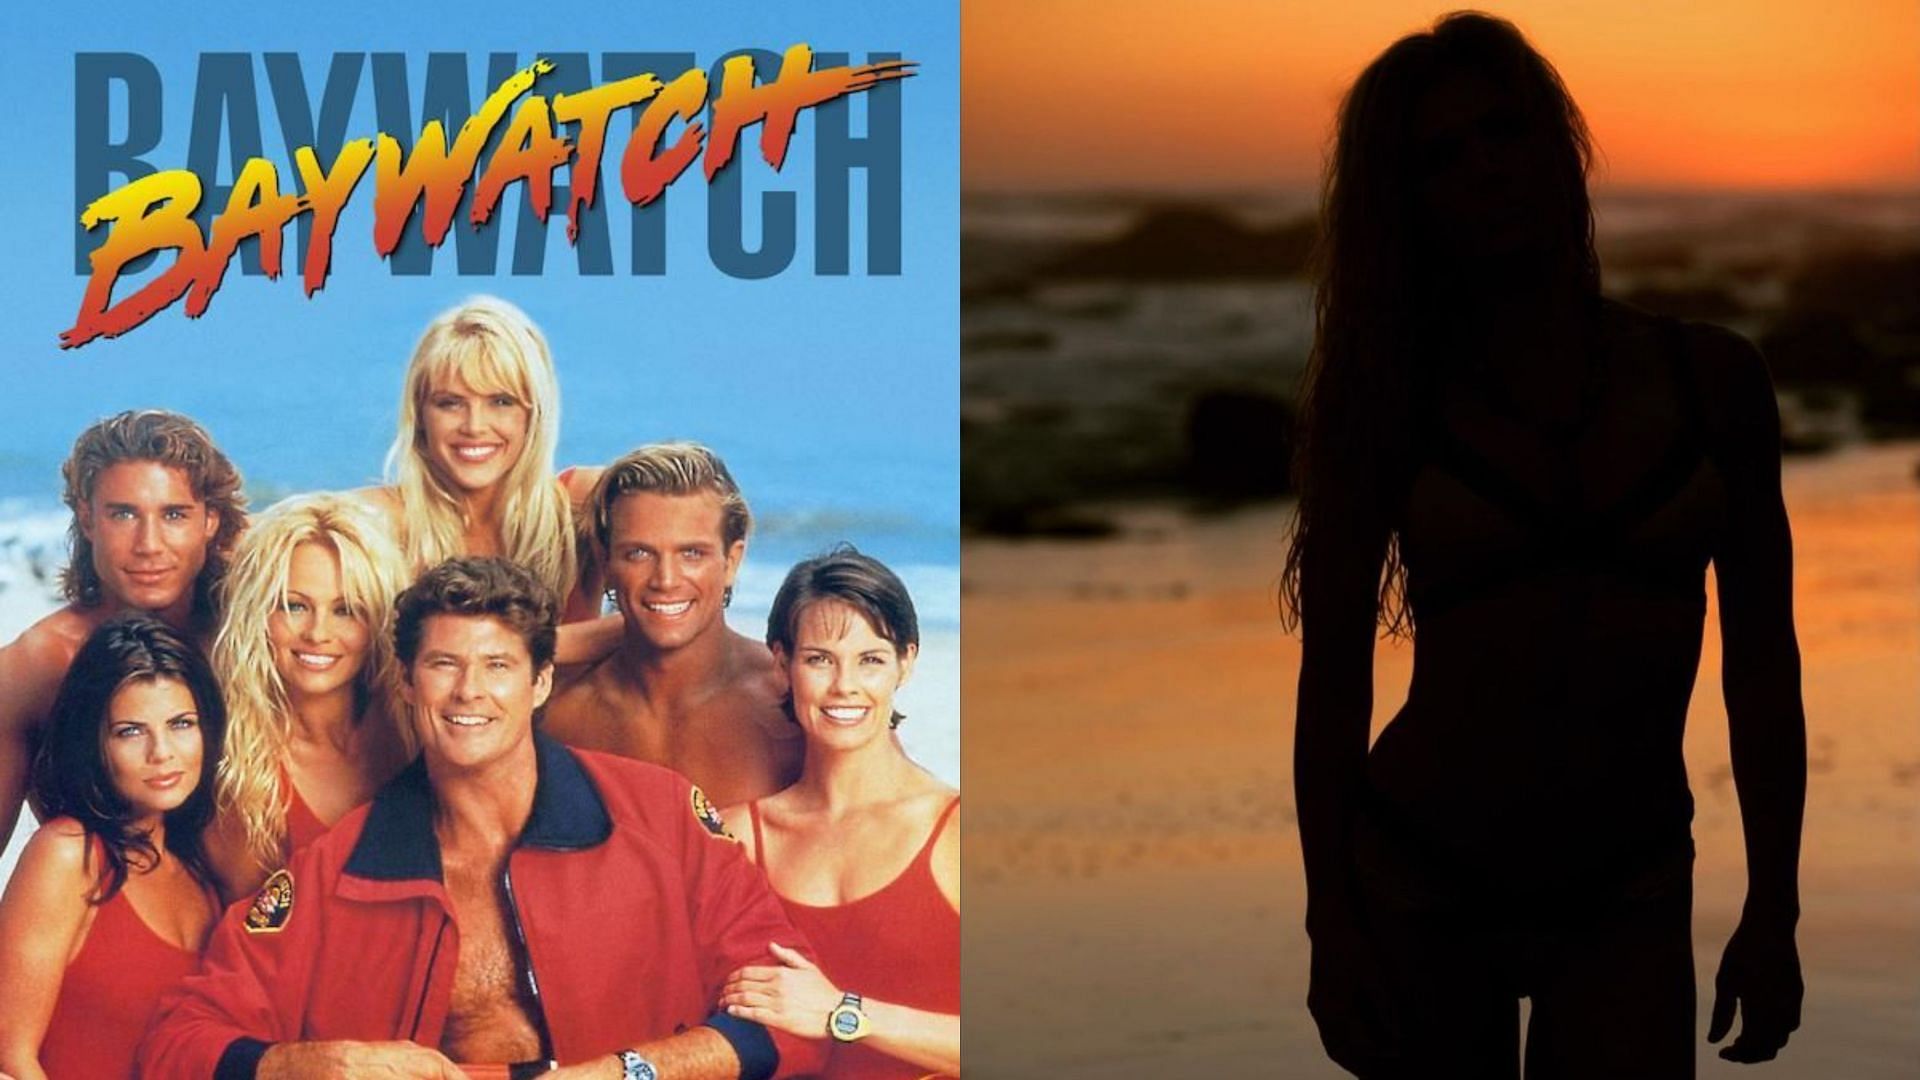 A WWE Hall of Famer appeared on Baywatch in 1999